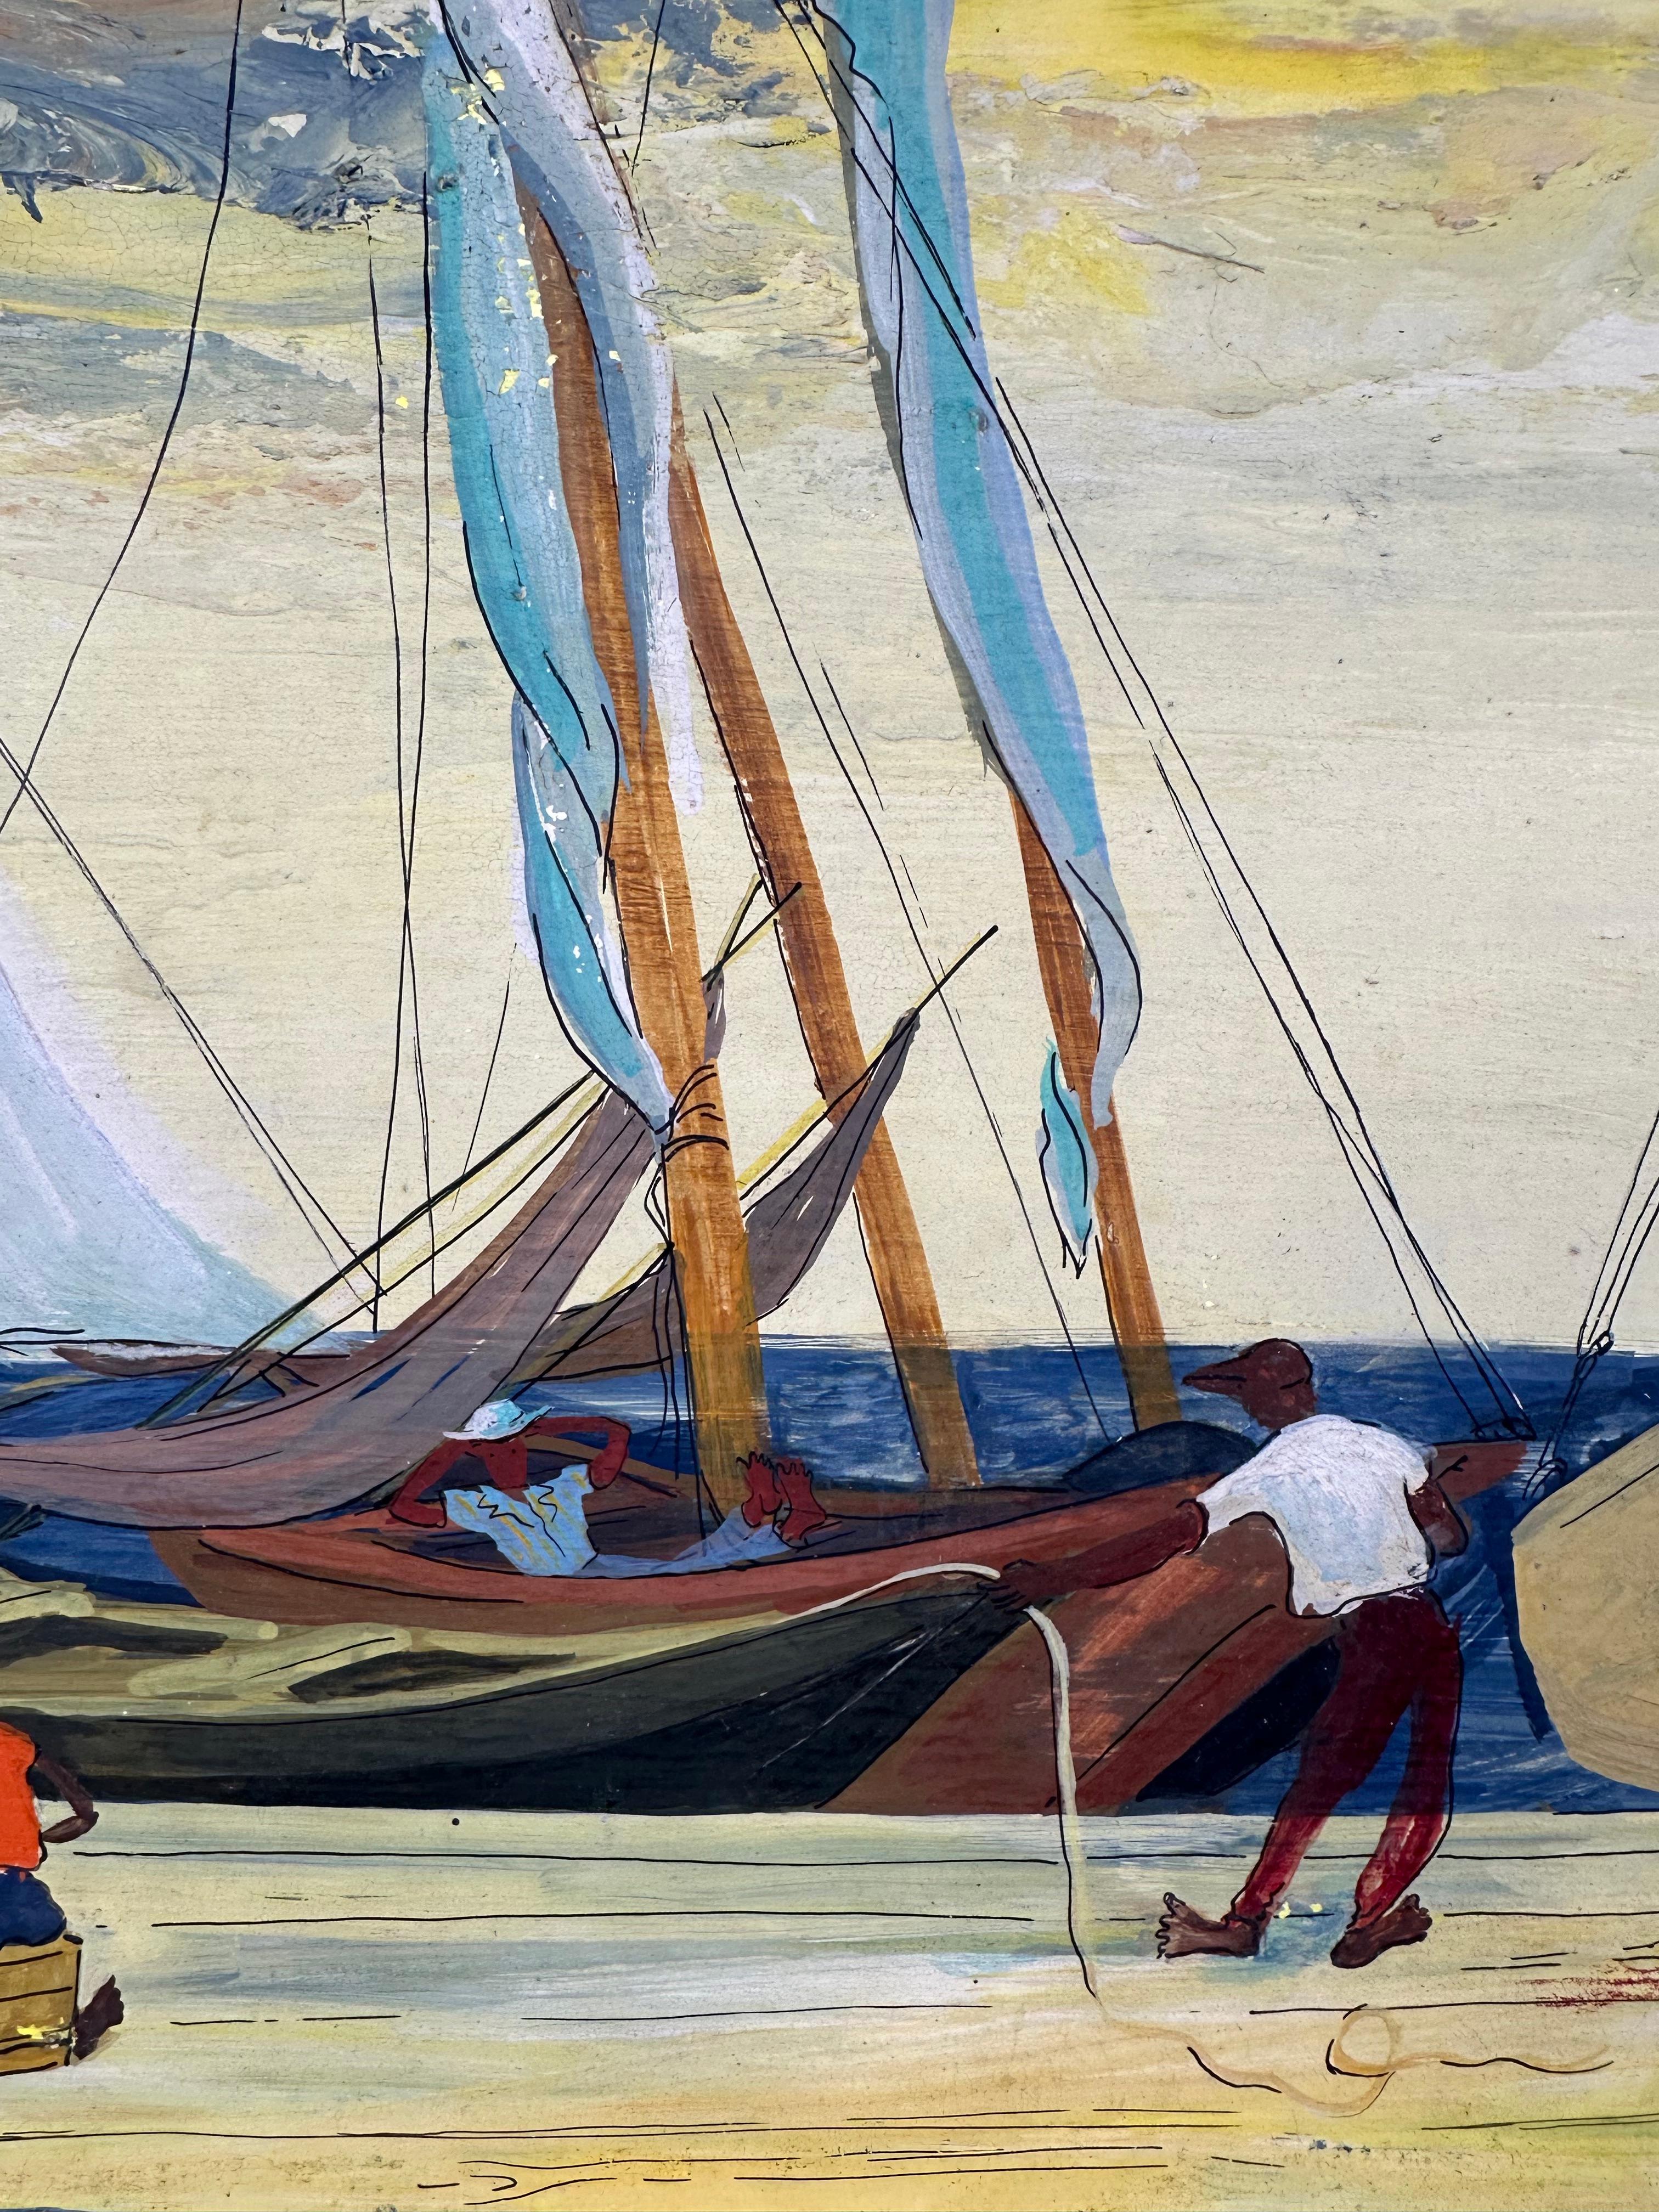 Beautiful painting depicts Bahamian fishing boats by Phoebe Towbin. Bahamian Fishermen, 1952. Alkyd on masonite panel measuring 16.5 x 22.5 inches; 22.5 x 28.5 inches framed. Signed and dated lower right. Minor craquelure and paint flaking.

The